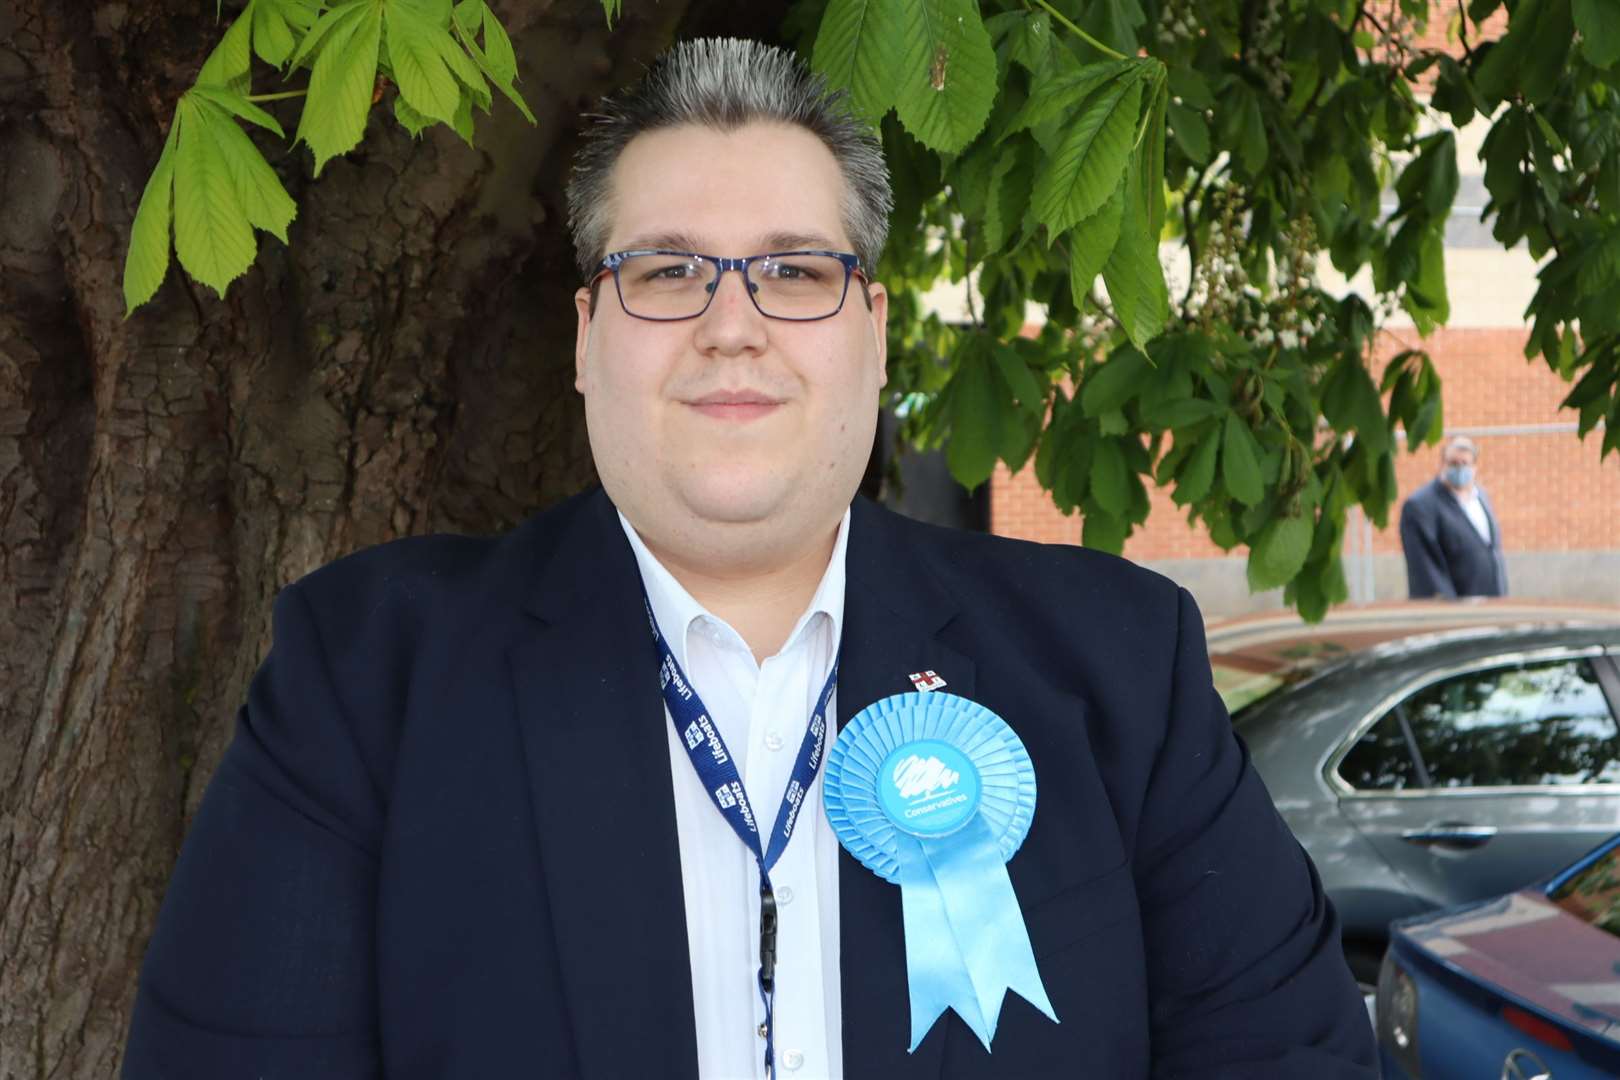 Cameron Beart (Conservative) tops the Sheppey poll for the KCC elections at Swallows Leisure Centre, Sittingbourne